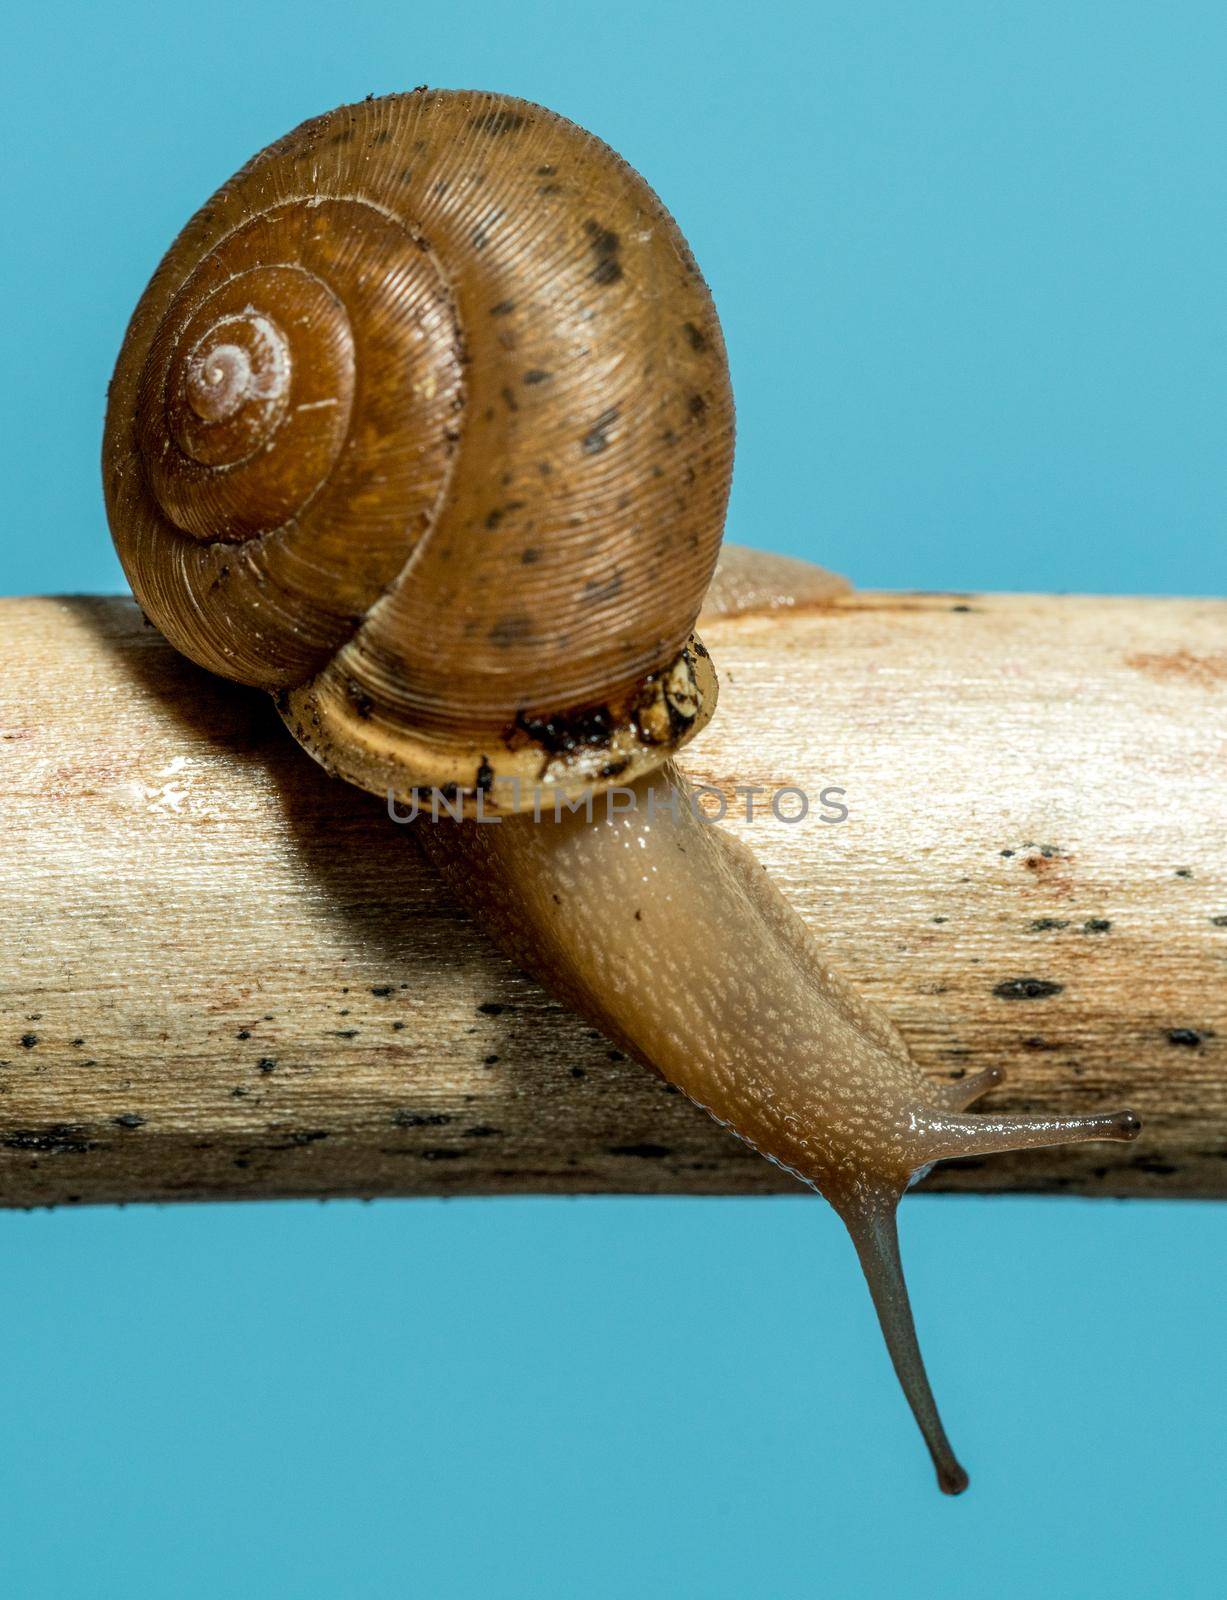 Studio shot of a pet garden snail and shell climbing up a wooden branch and set against blue background